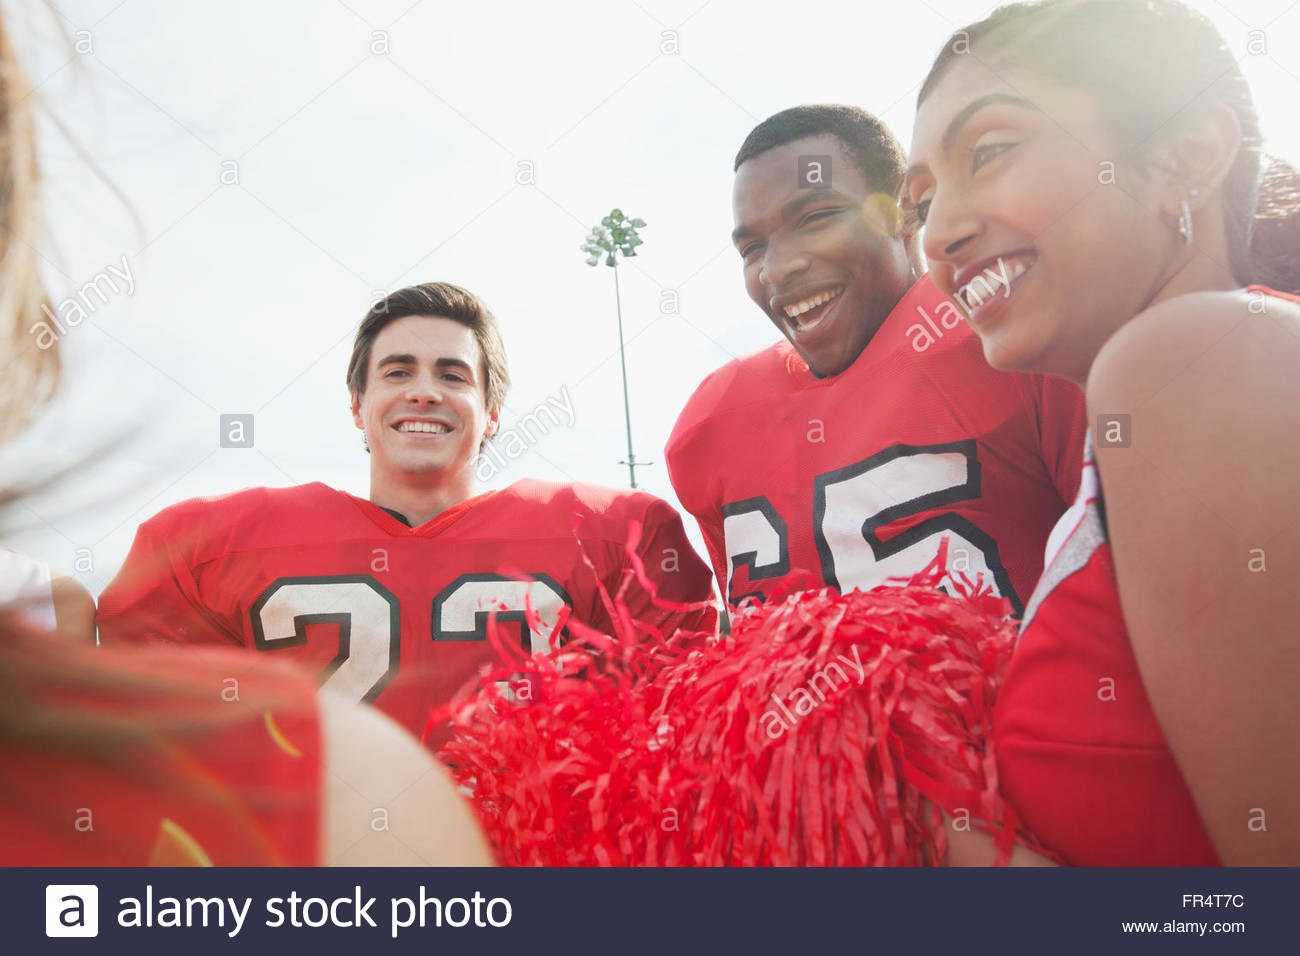 college football players with cheerleaders Stock Photo